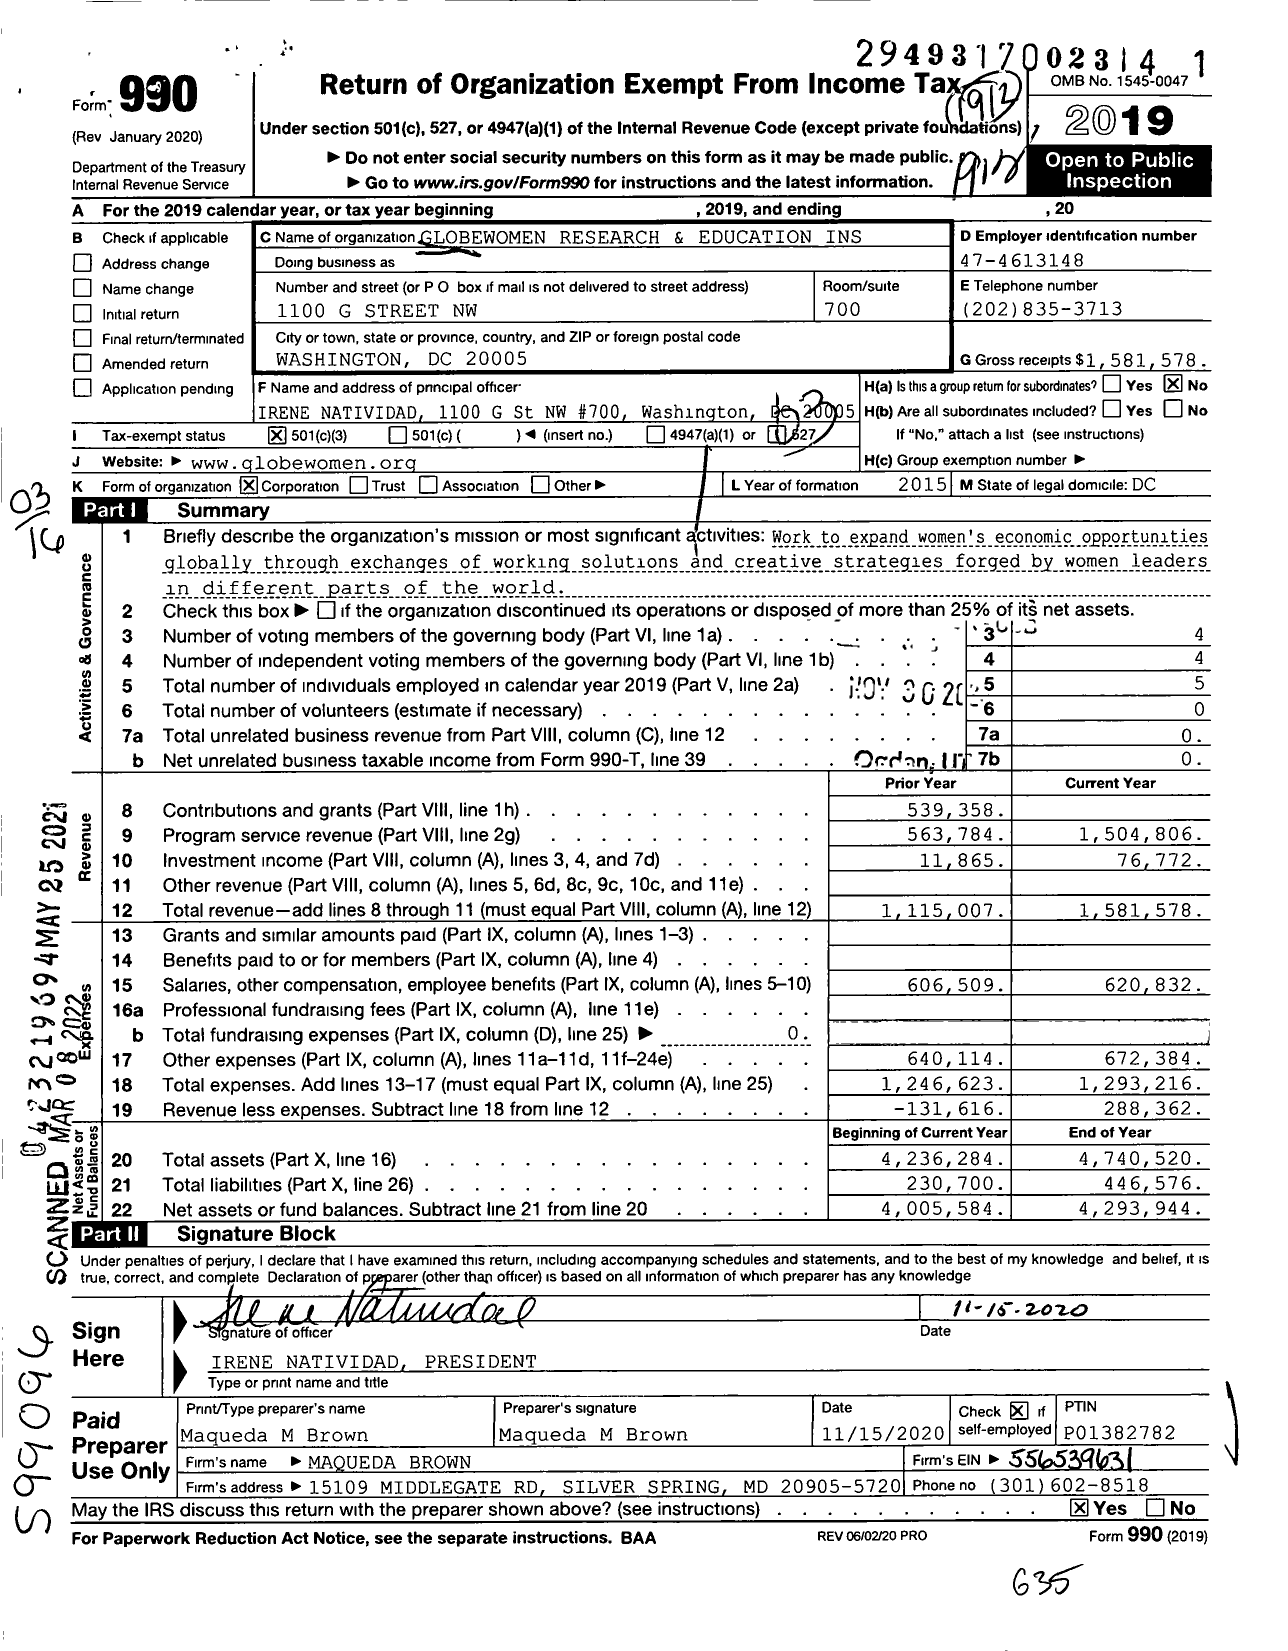 Image of first page of 2019 Form 990 for Globewomen Research and Education Institute